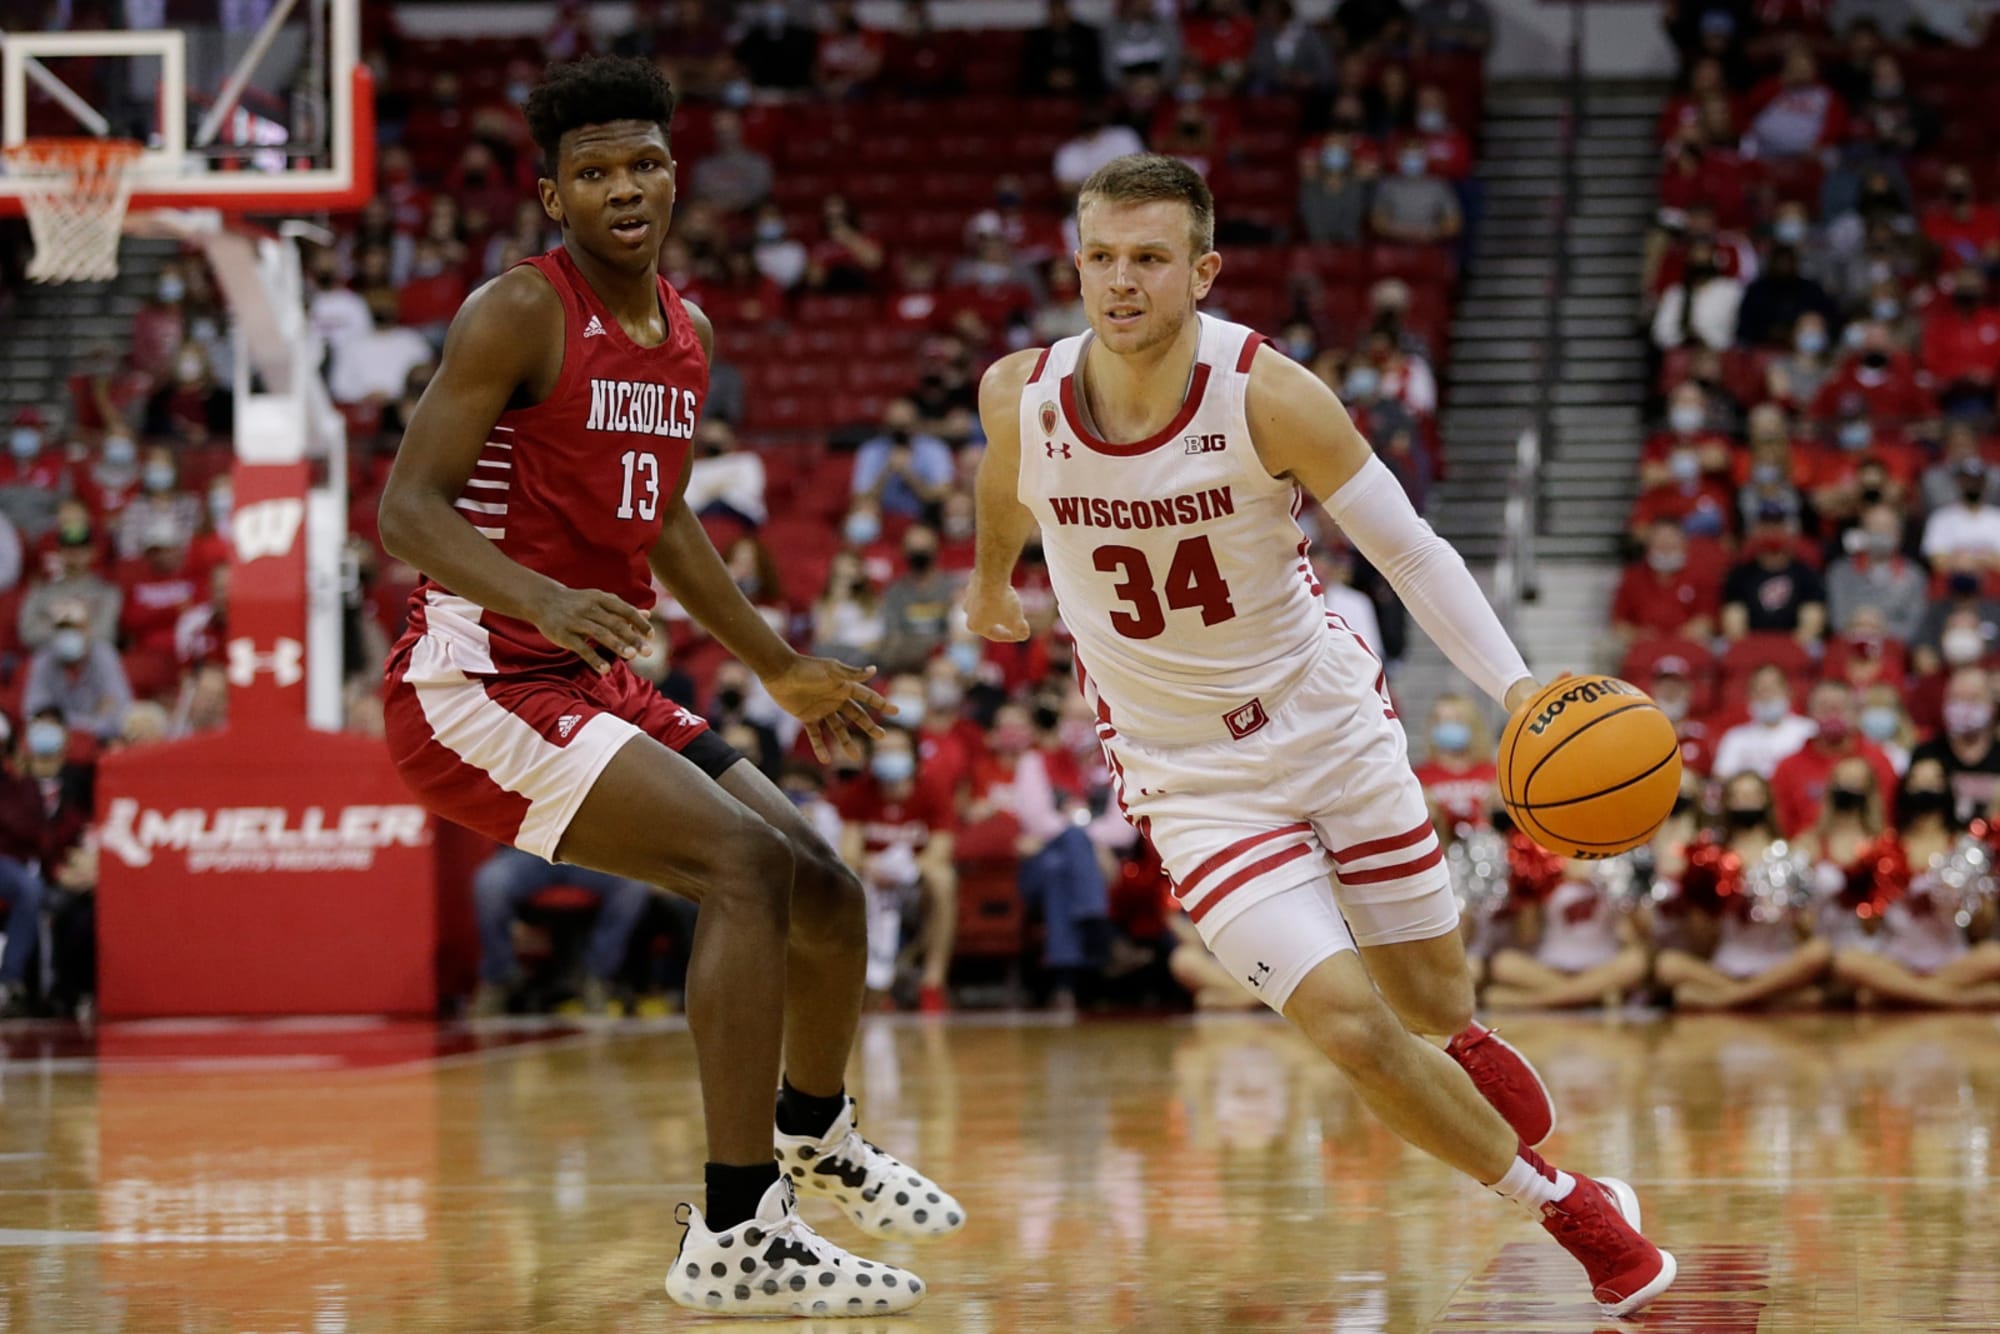 Wisconsin Game Today Wisconsin vs George Mason, Predictions, Odds, TV Channel and Live Stream for Basketball Game Dec